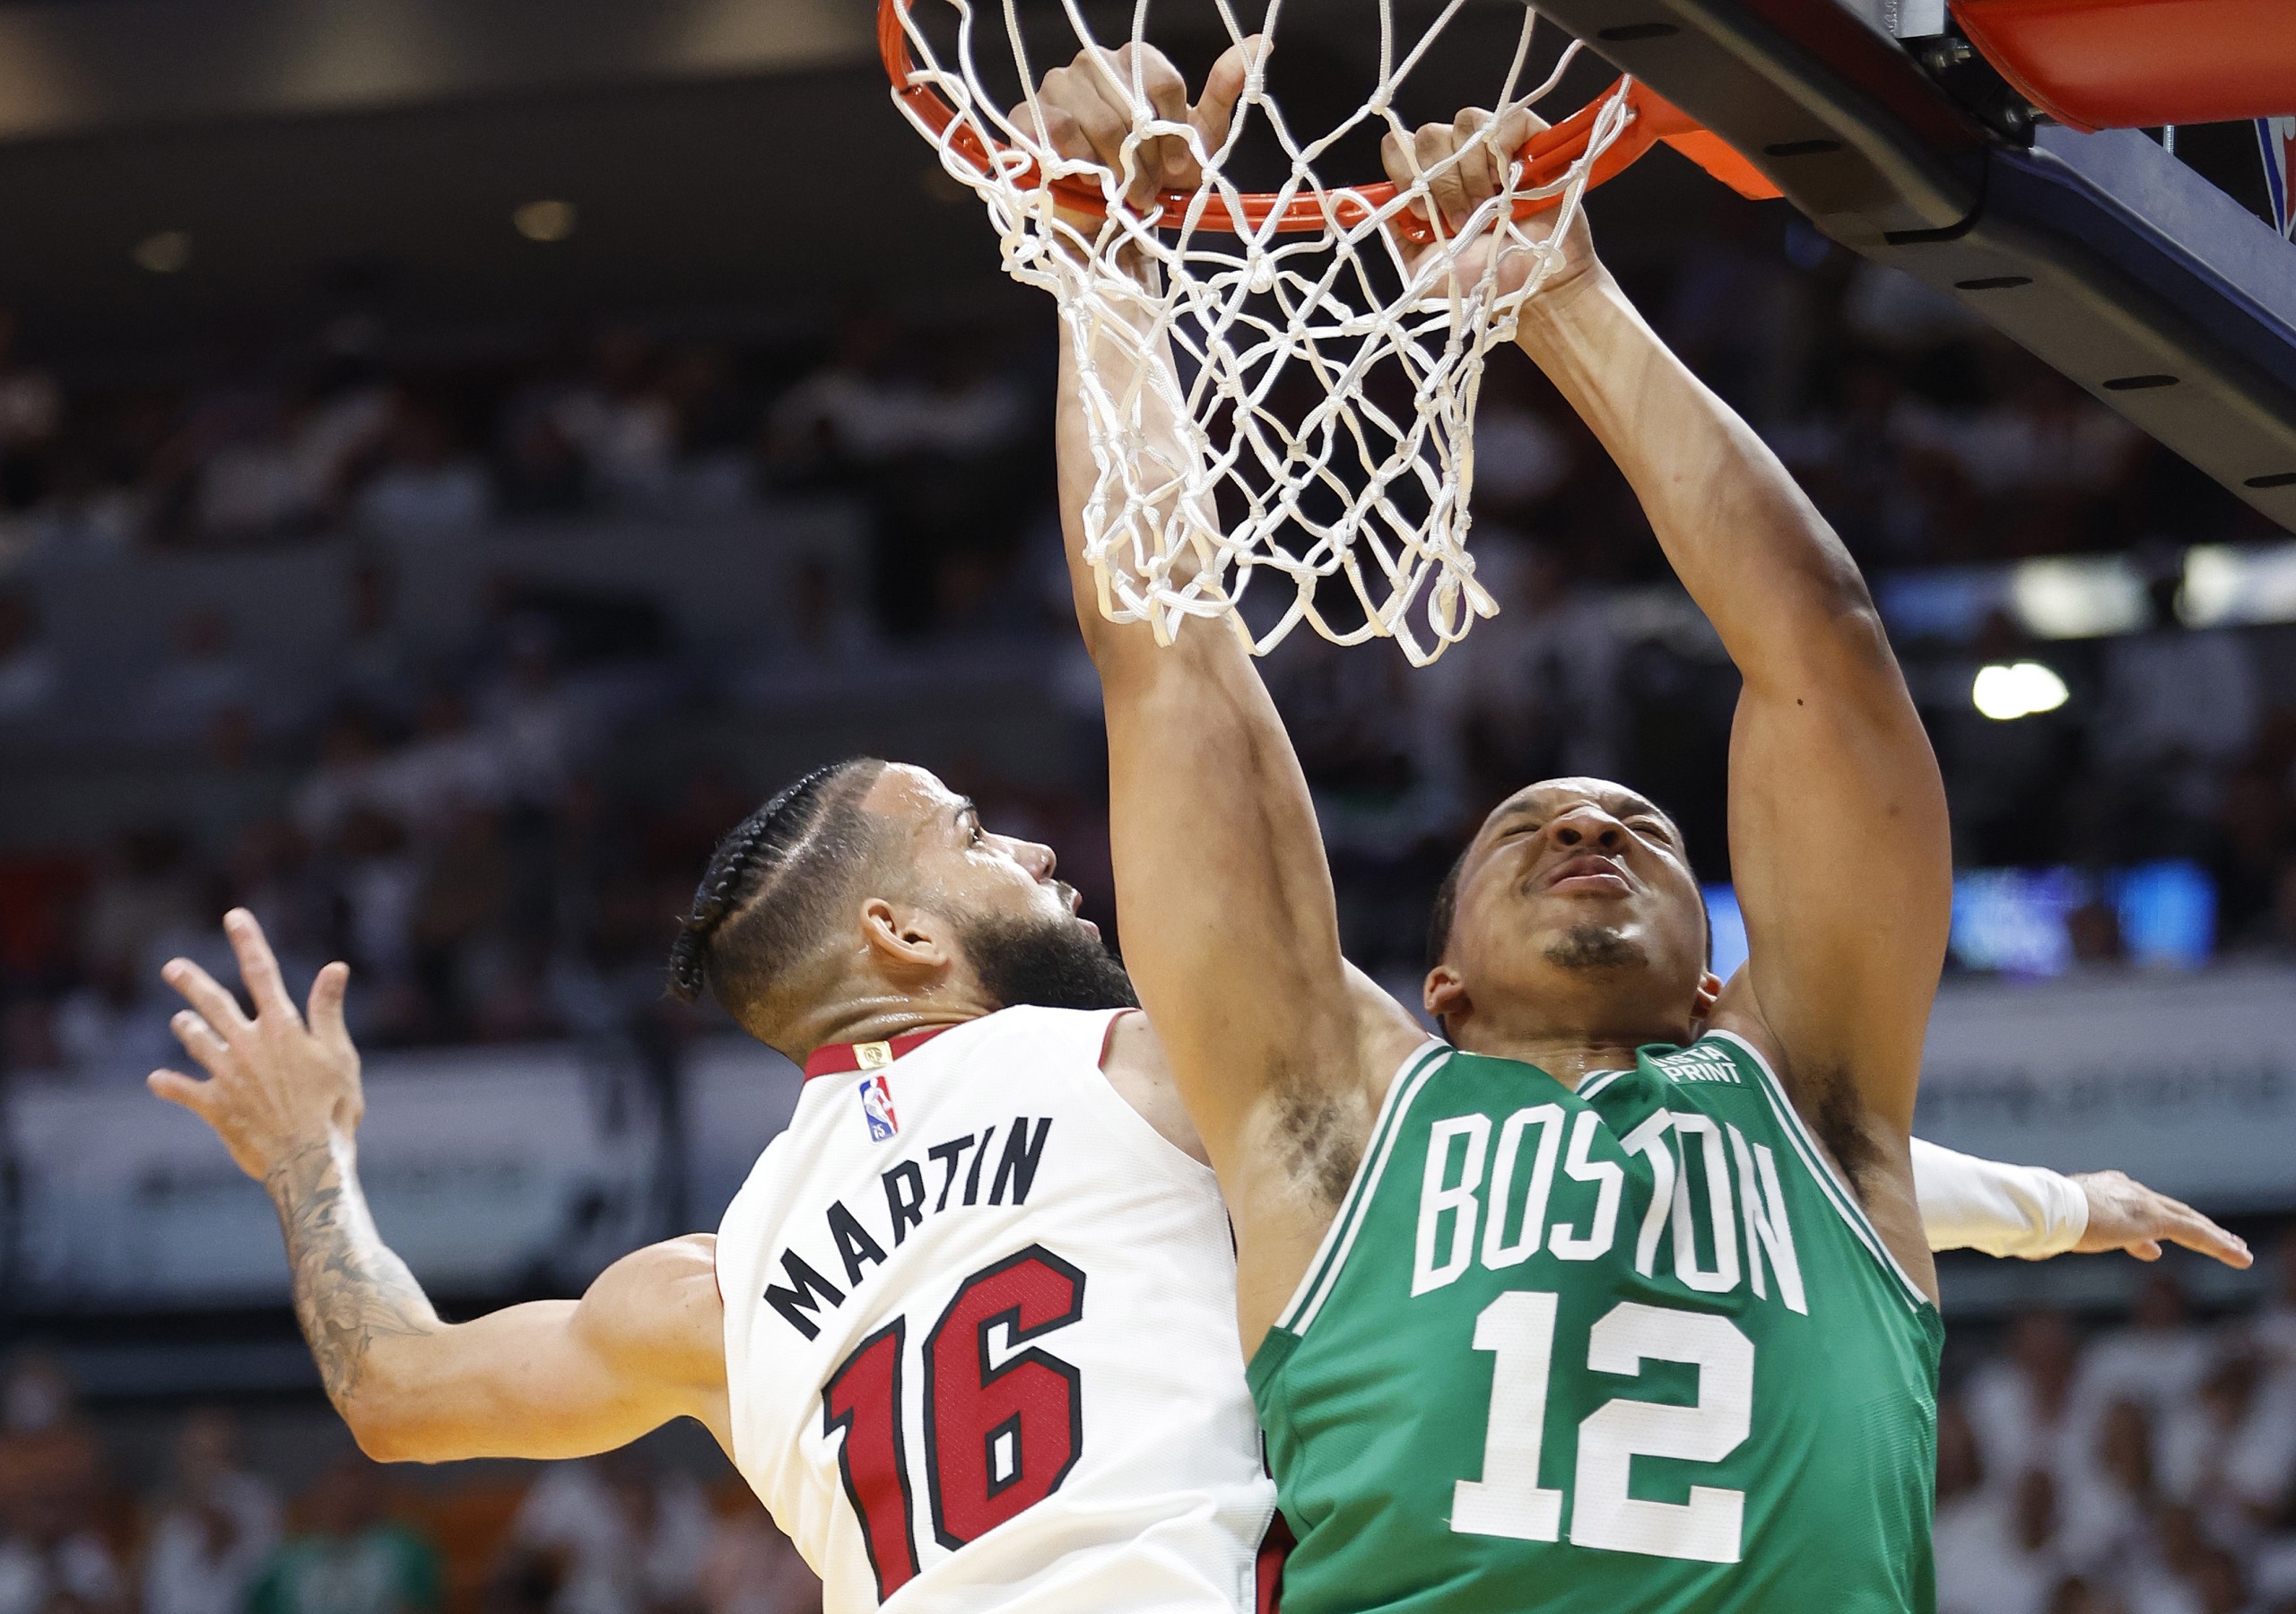 epa09959452 Boston Celtics forward Grant Williams (R) is fouled by Miami Heat forward Caleb Martin (L), during the first half of Game 2 of the NBA Eastern Conference Finals between the Miami Heat and the Boston Celtics at FTX Arena, in Miami, Florida, USA, 19 May 2022.  EPA/RHONA WISE  SHUTTERSTOCK OUT